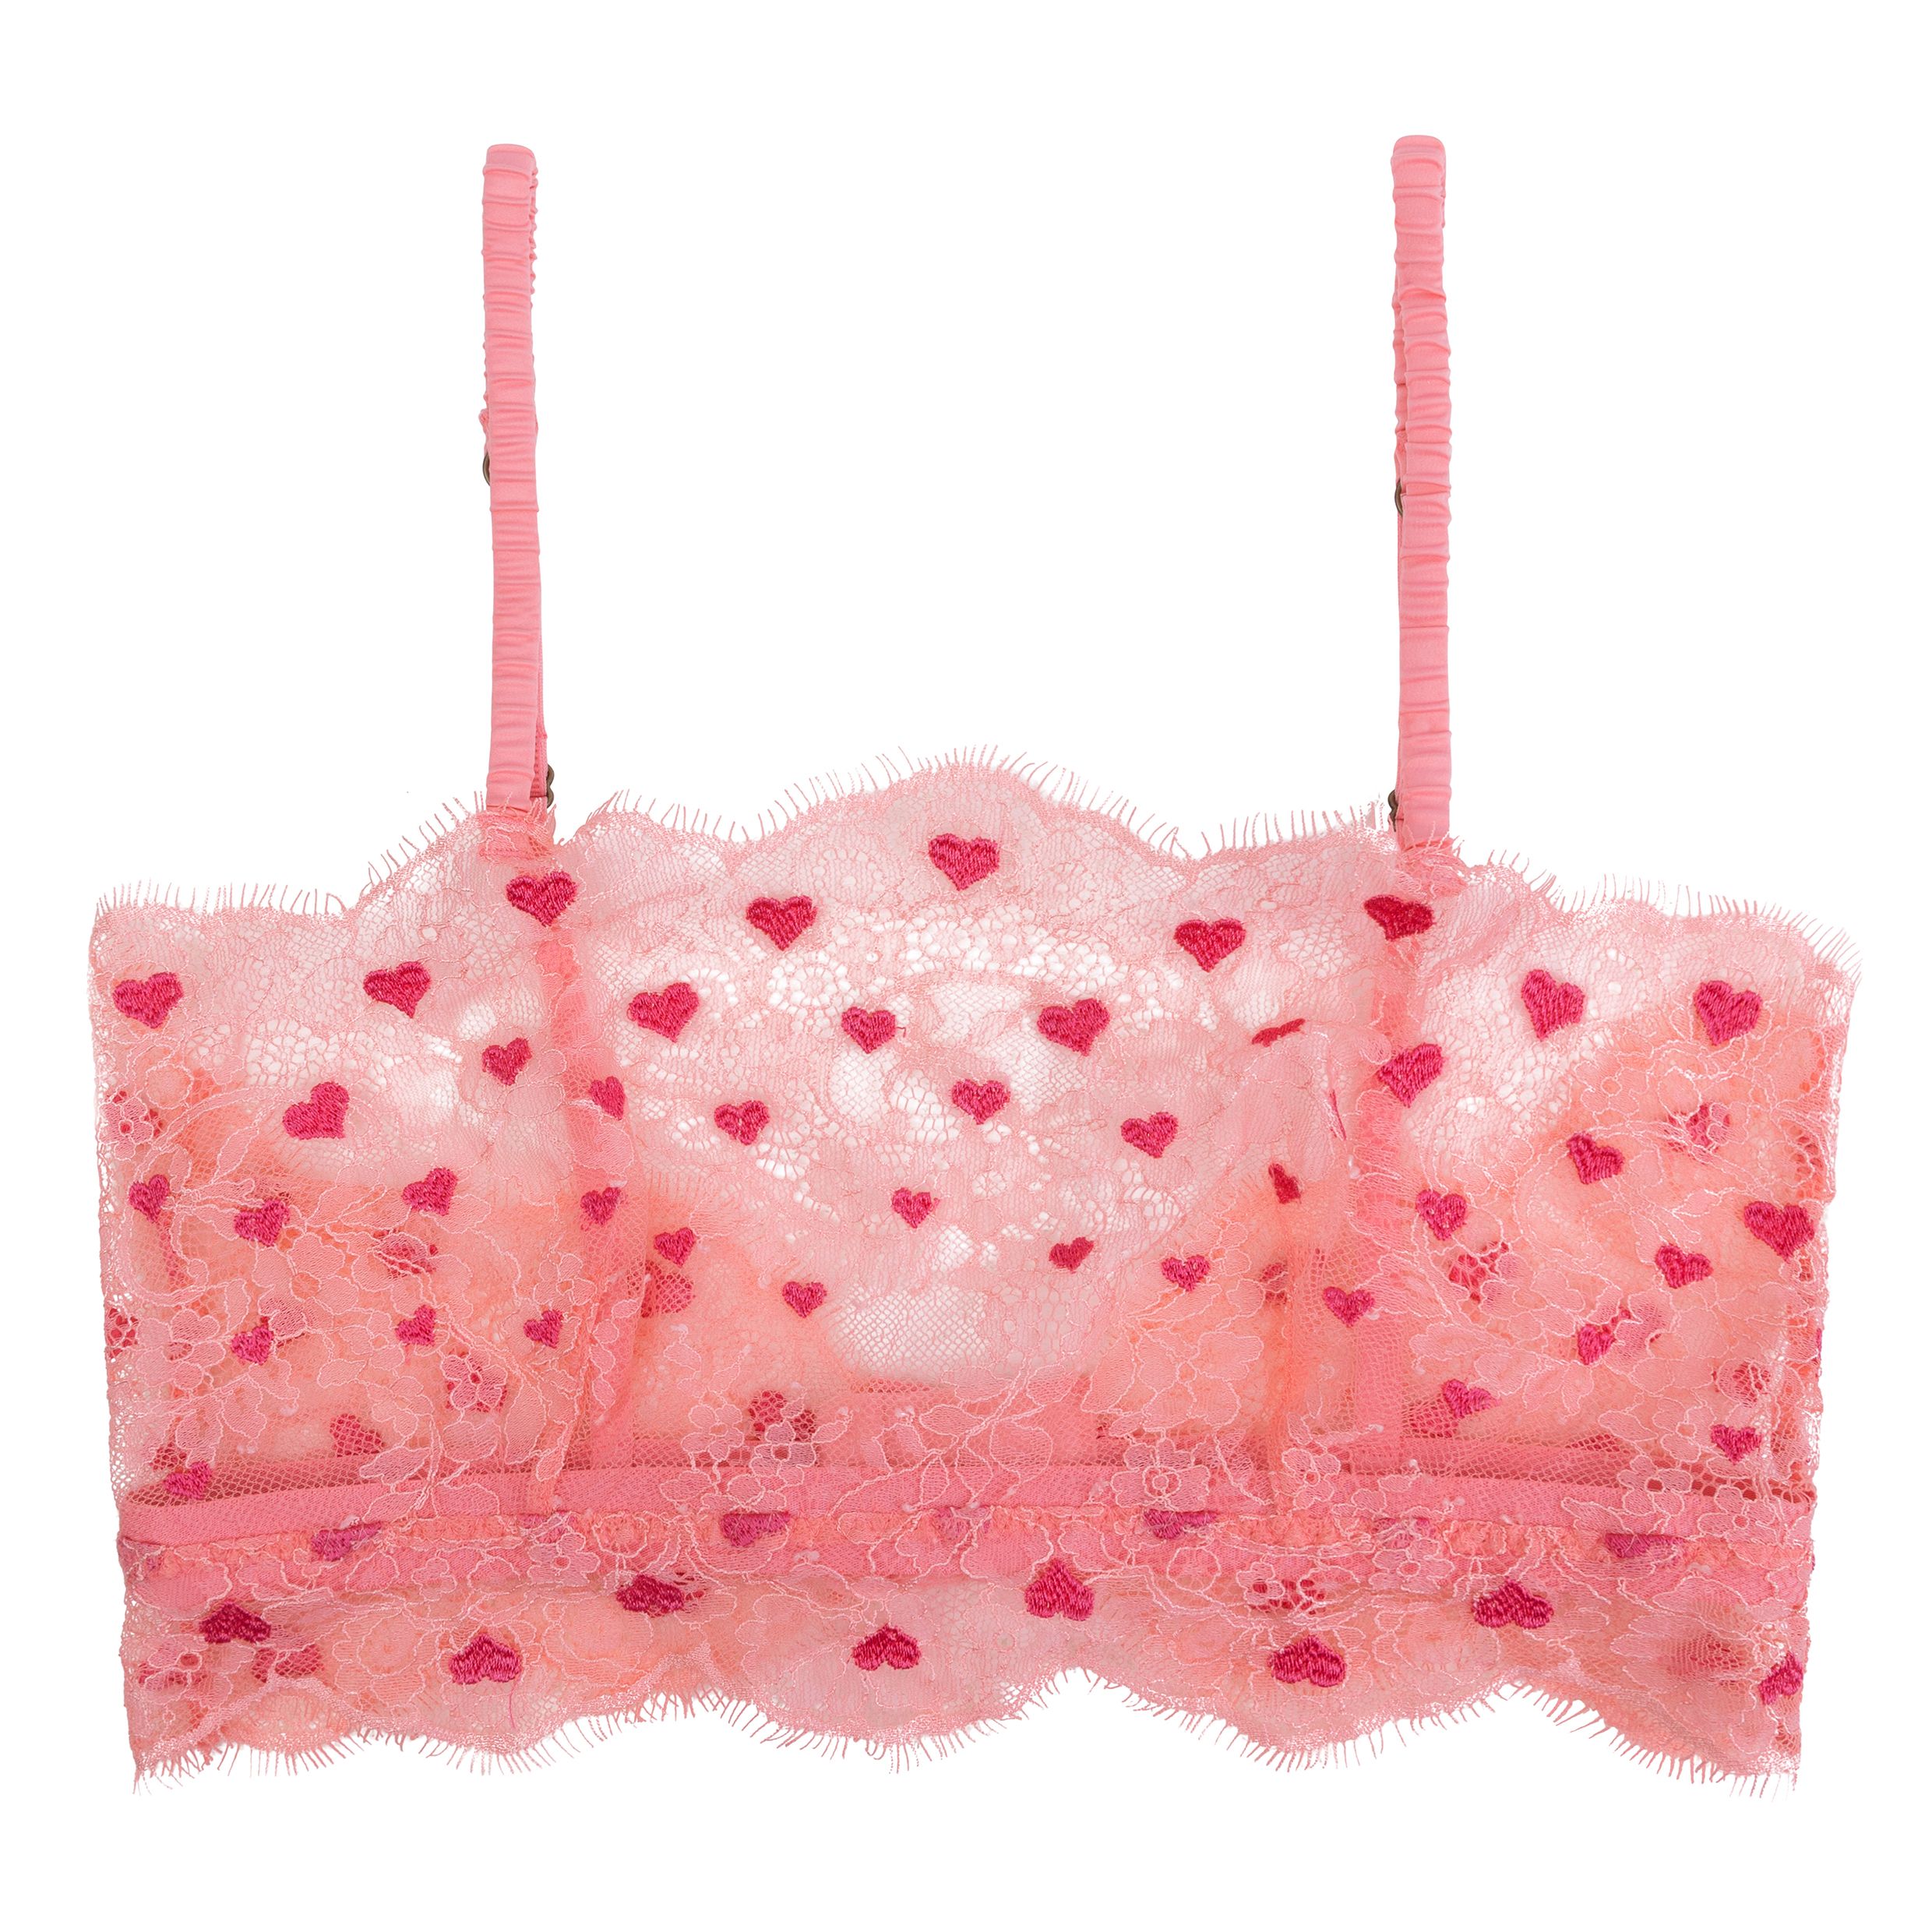 Berlei x BCNA Pink Bra Collection - Woman of Style and Substance